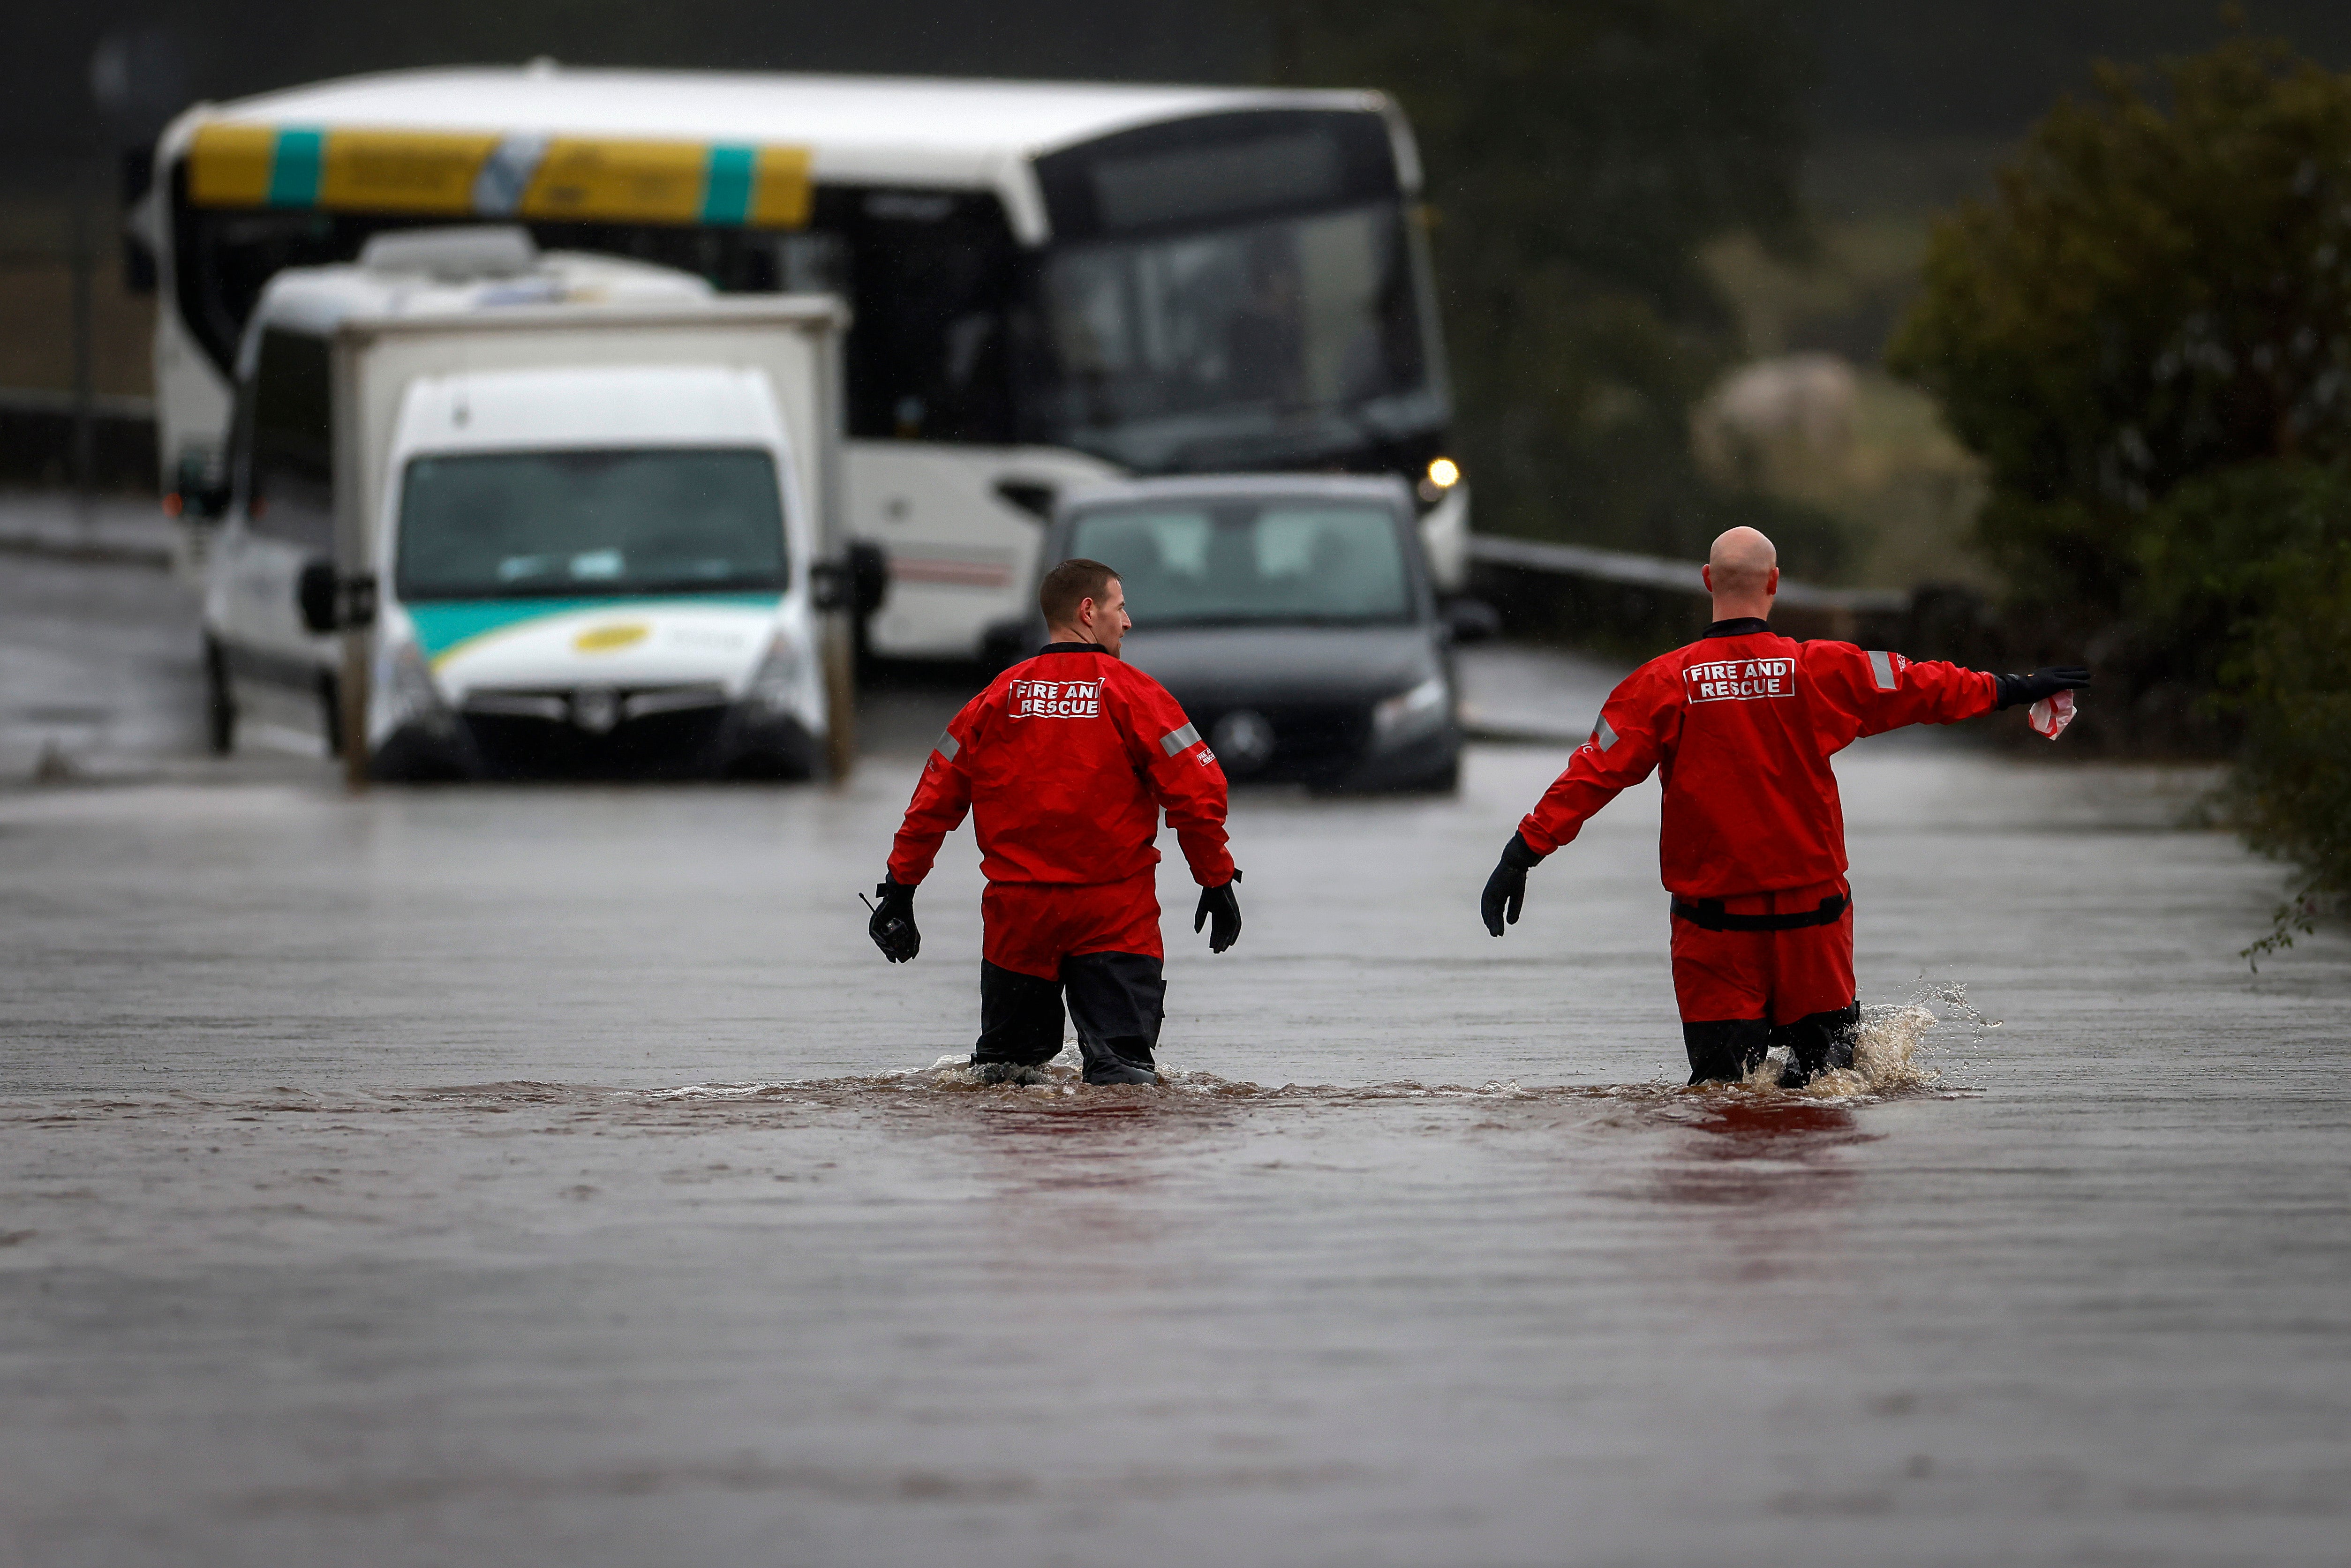 Some parts of Scotland saw a month’s rain in just 24 hours